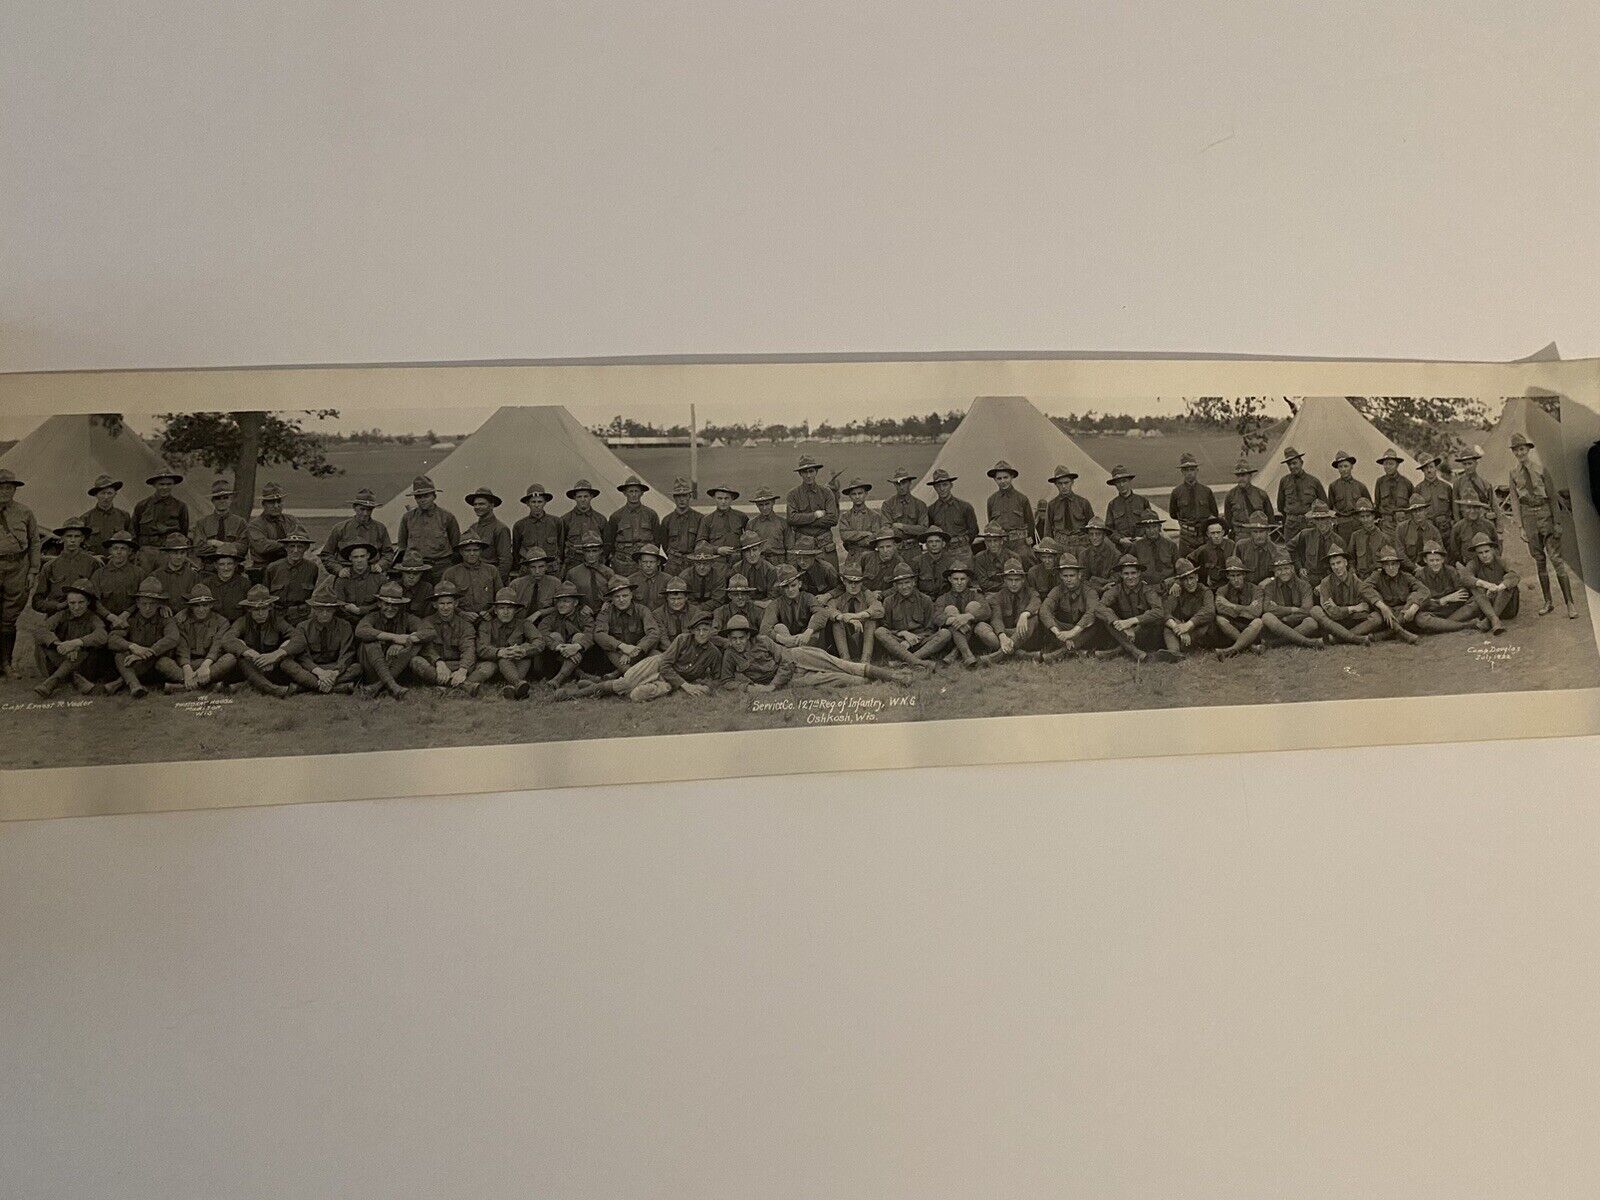 Vintage Rare Photo Of The 127th Regiment Infantry Division From Oshkosh Wi 1922